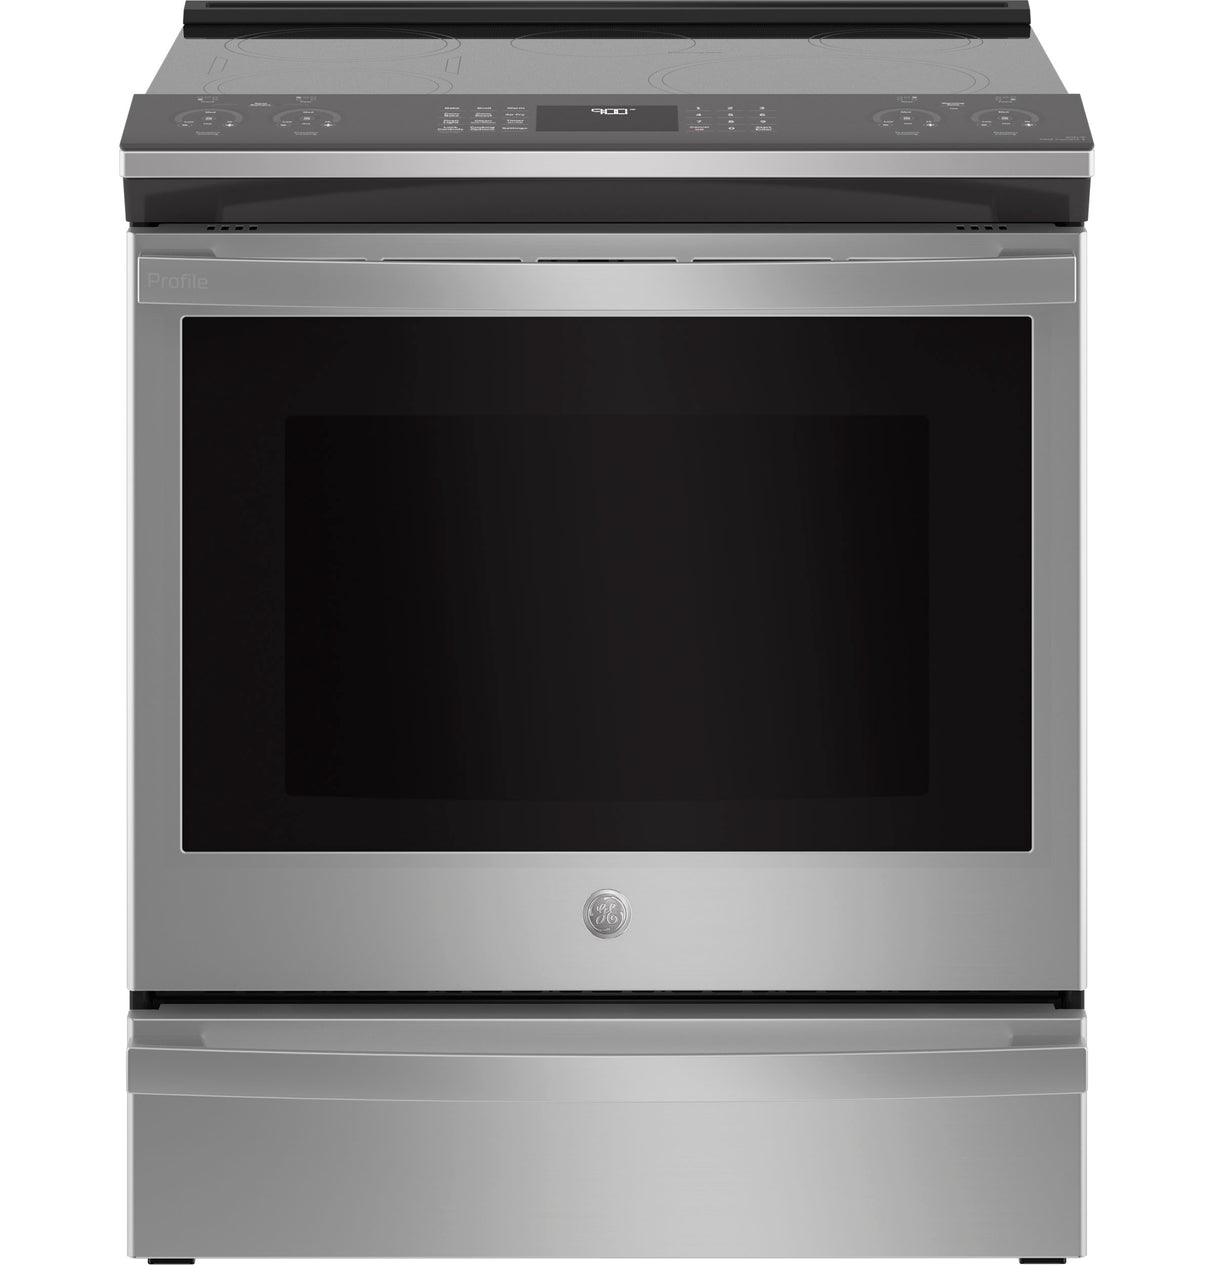 GE Profile(TM) 30" Smart Slide-In Fingerprint Resistant Front-Control Induction and Convection Range with No Preheat Air Fry - (PHS930YPFS)